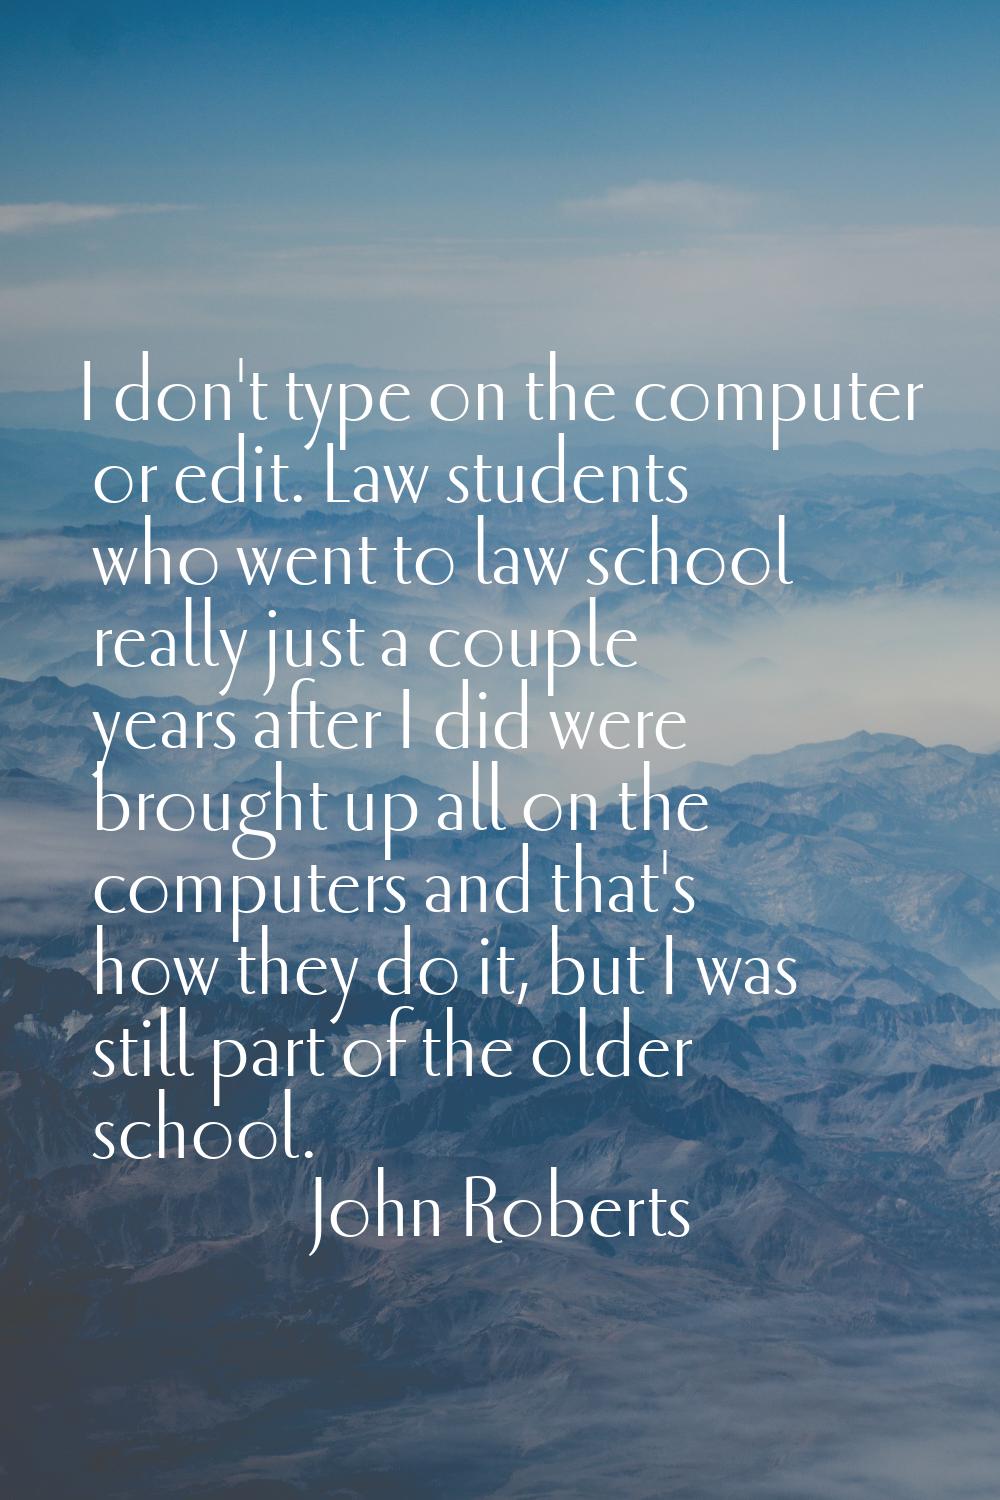 I don't type on the computer or edit. Law students who went to law school really just a couple year